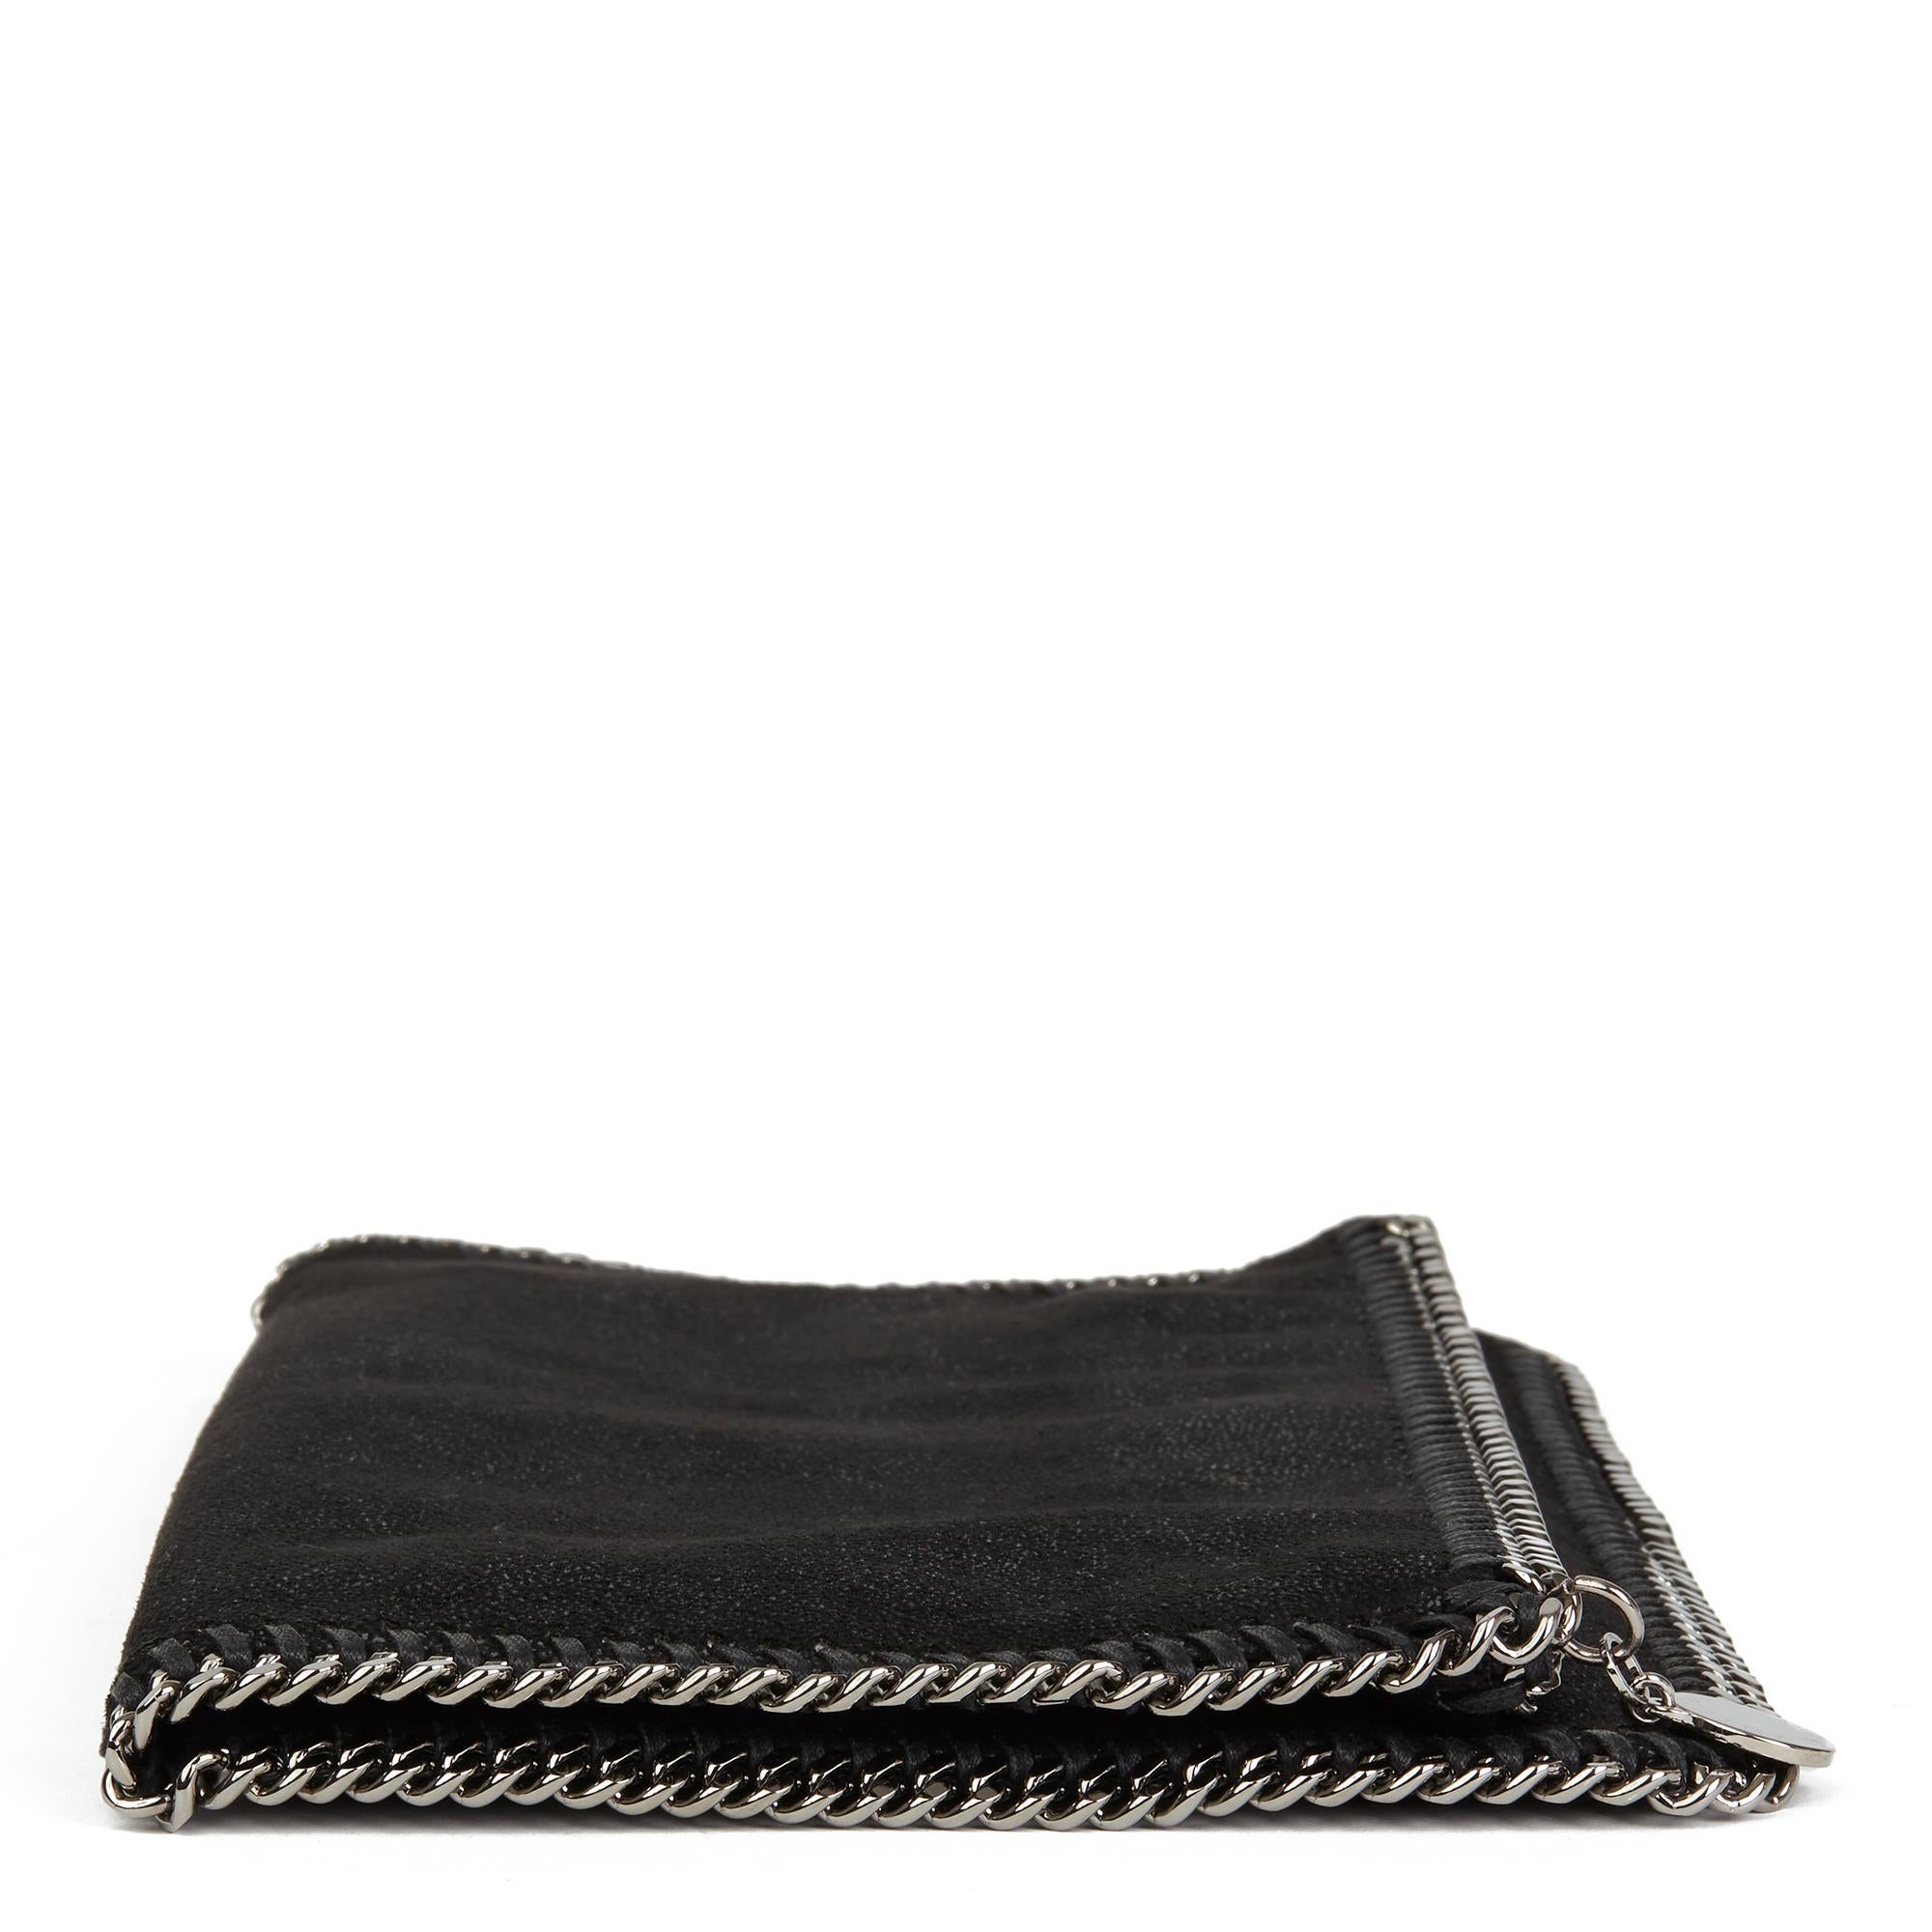 STELLA MCCARTNEY
Black Shaggy Deer Artificial Leather Falabella Foldover Clutch

Reference: HB2464
Serial Number: 10
Age (Circa): 2010
Accompanied By: Stella McCartney Dust Bag
Authenticity Details: Serial Tag (Made in Italy)
Gender: Ladies
Type: